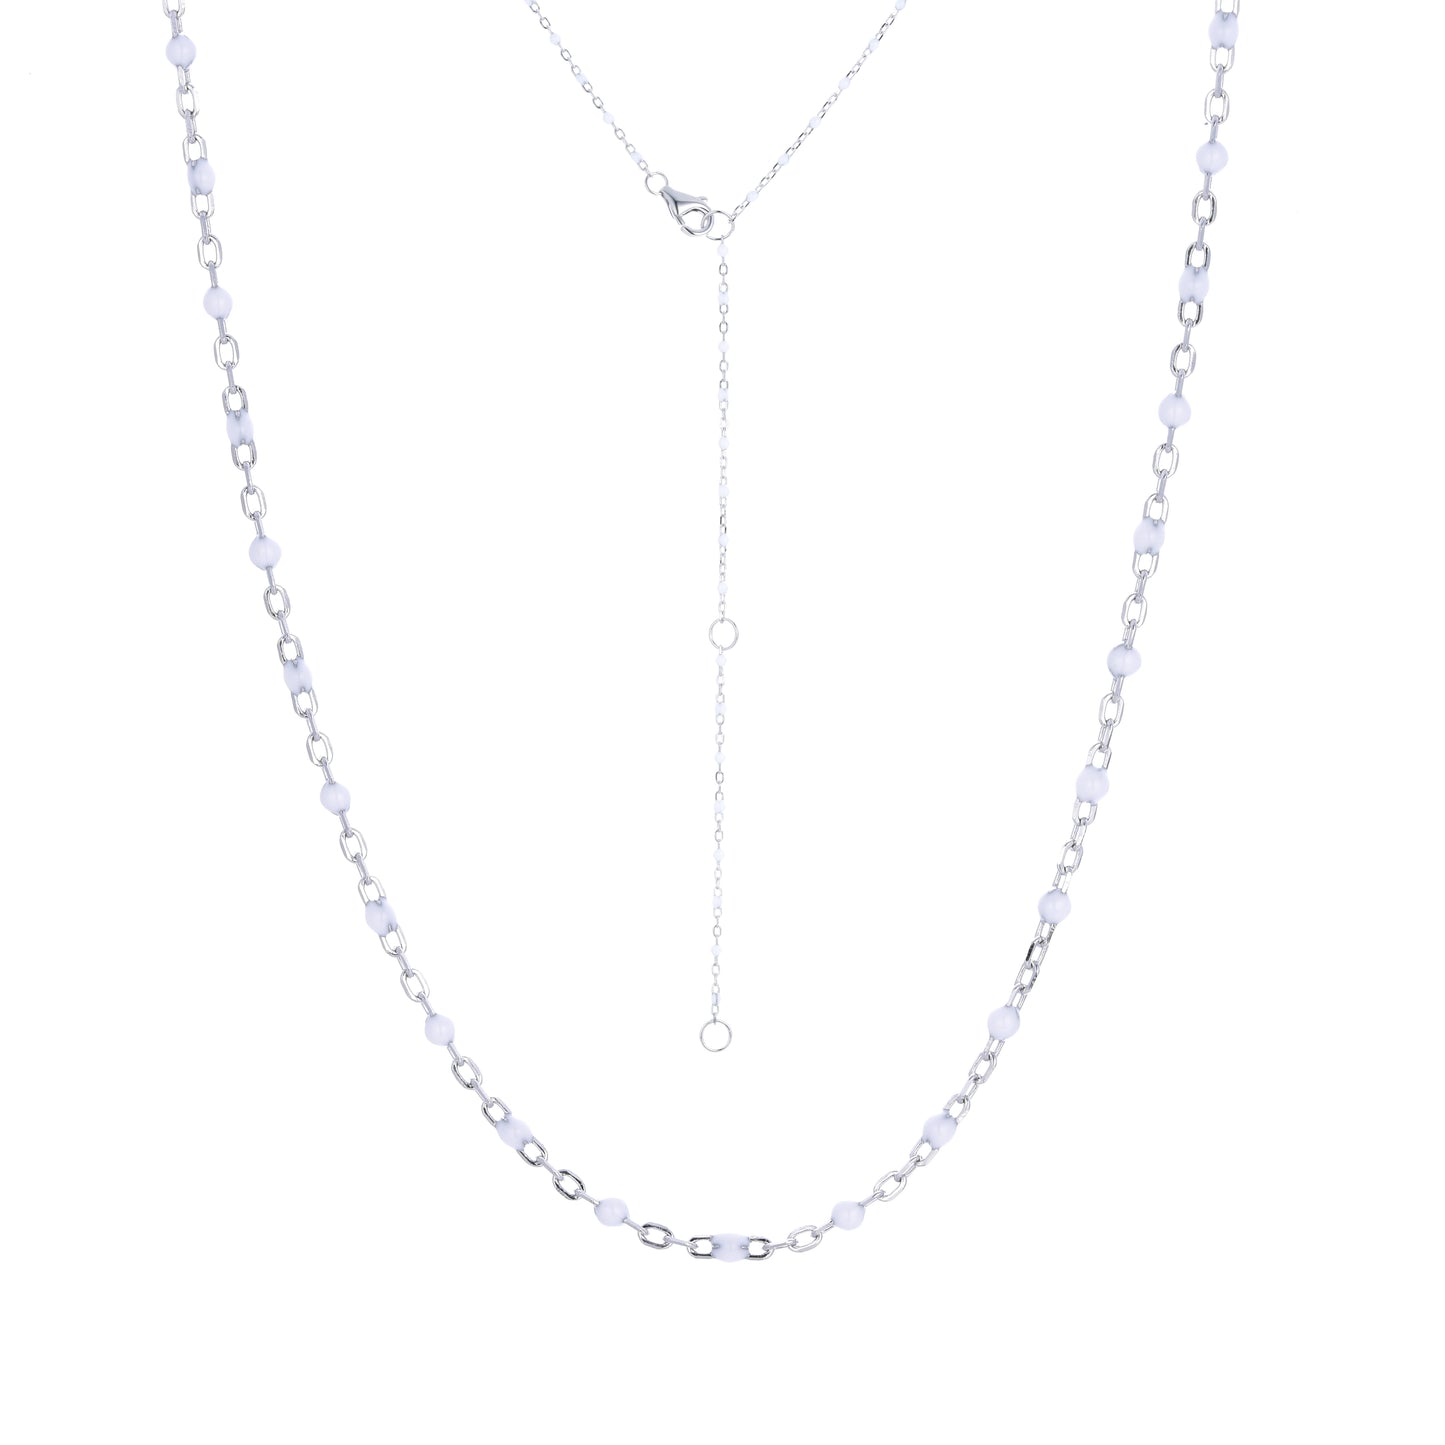 ANGELINA WHITE BEADED SILVER NECKLACE